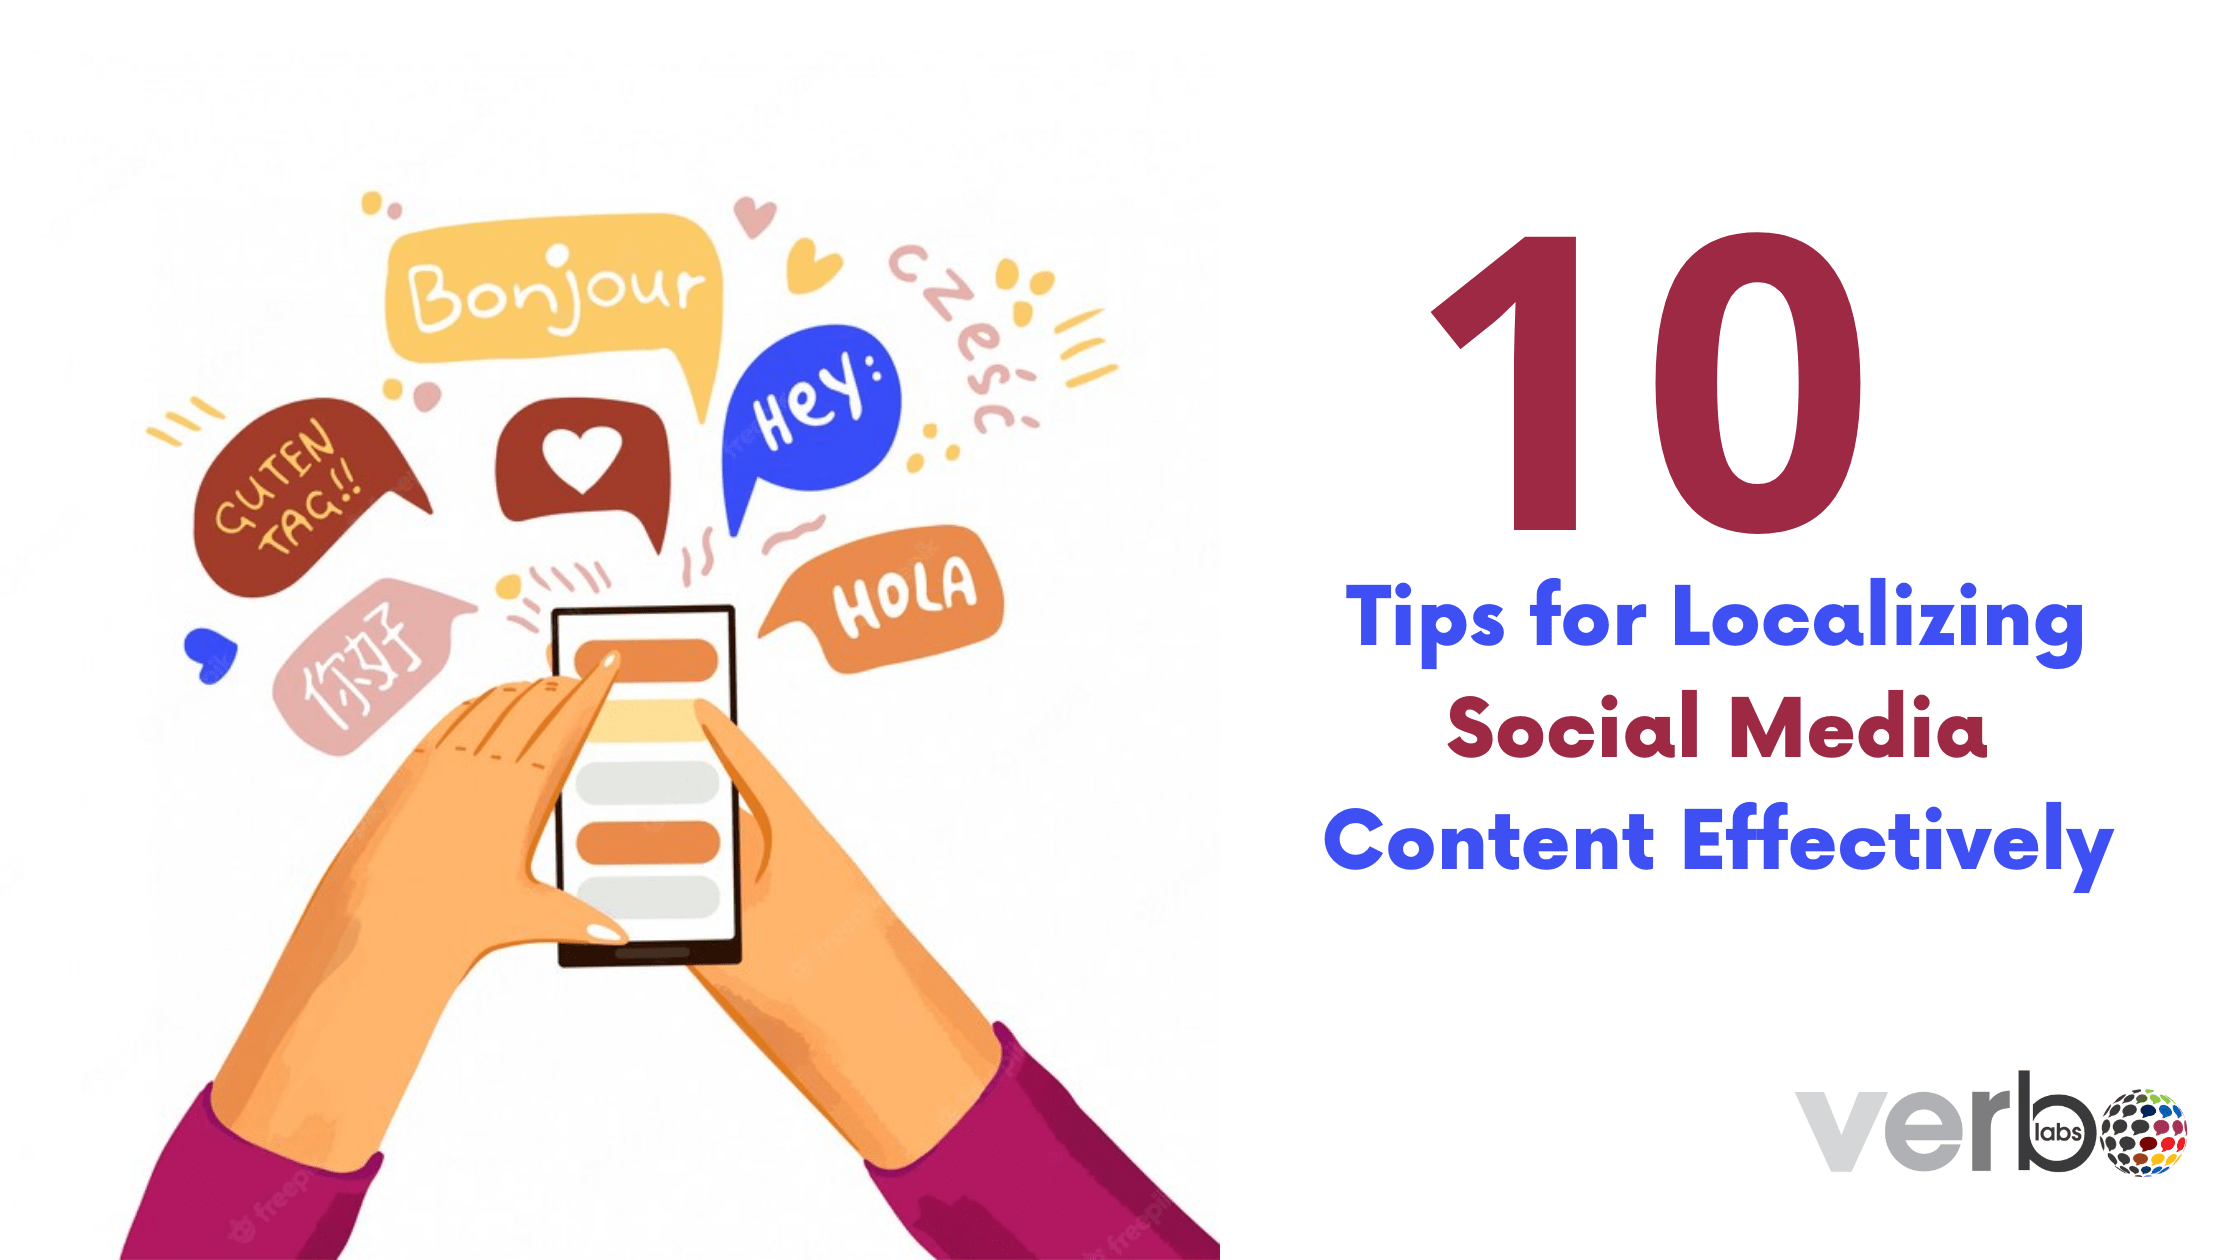 10 Tips for Localizing Social Media Content Effectively